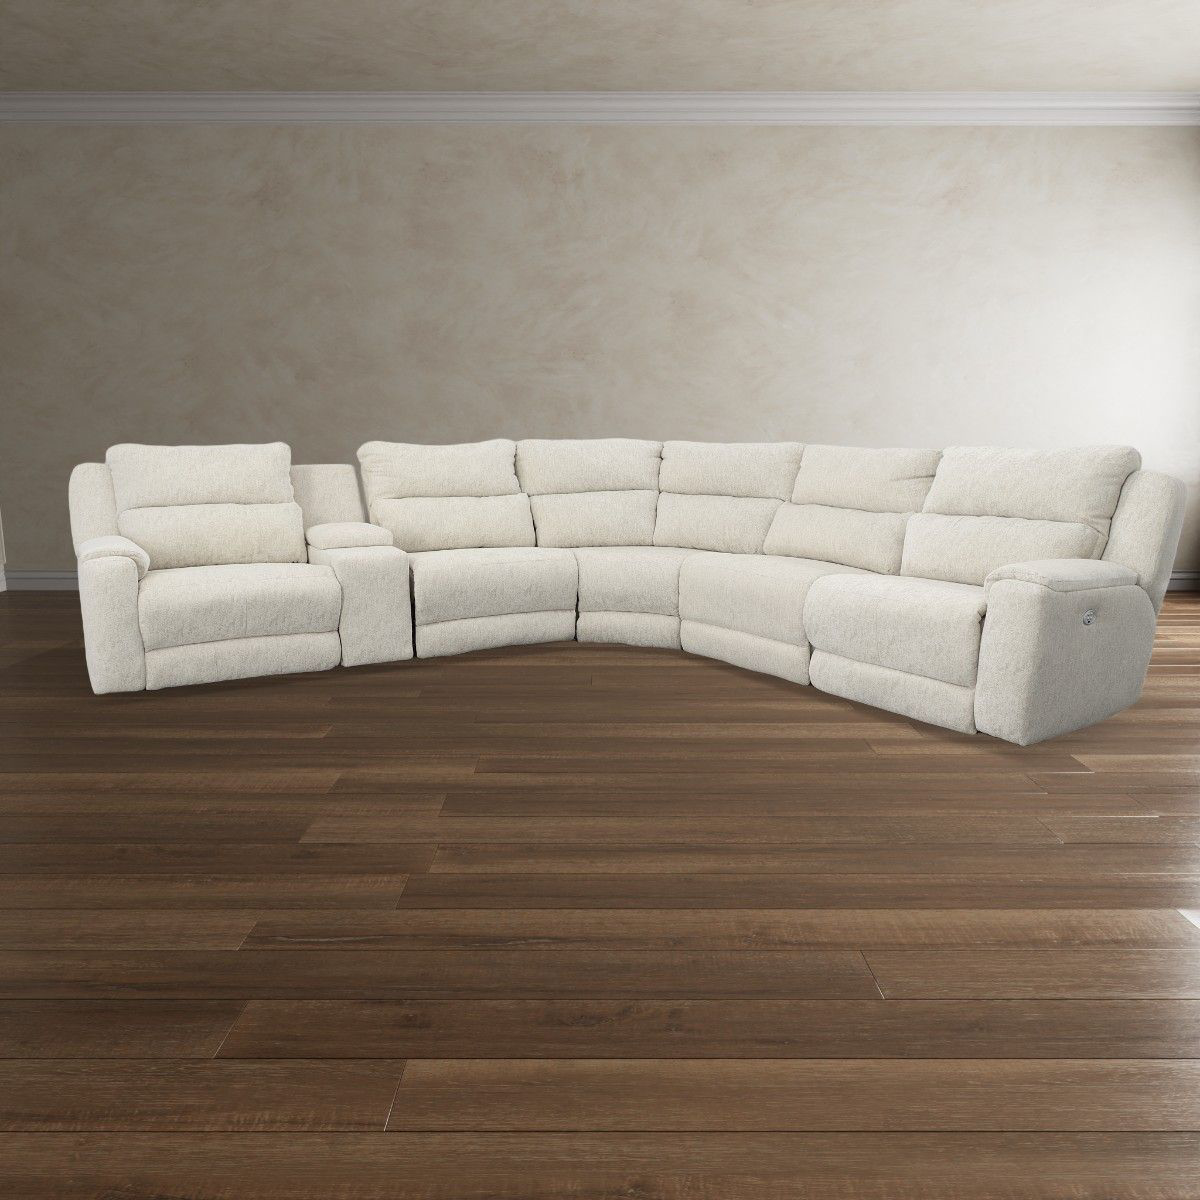 Picture of Dazzle 6 Piece Power Leather Sectional Sofa with Power Headrest